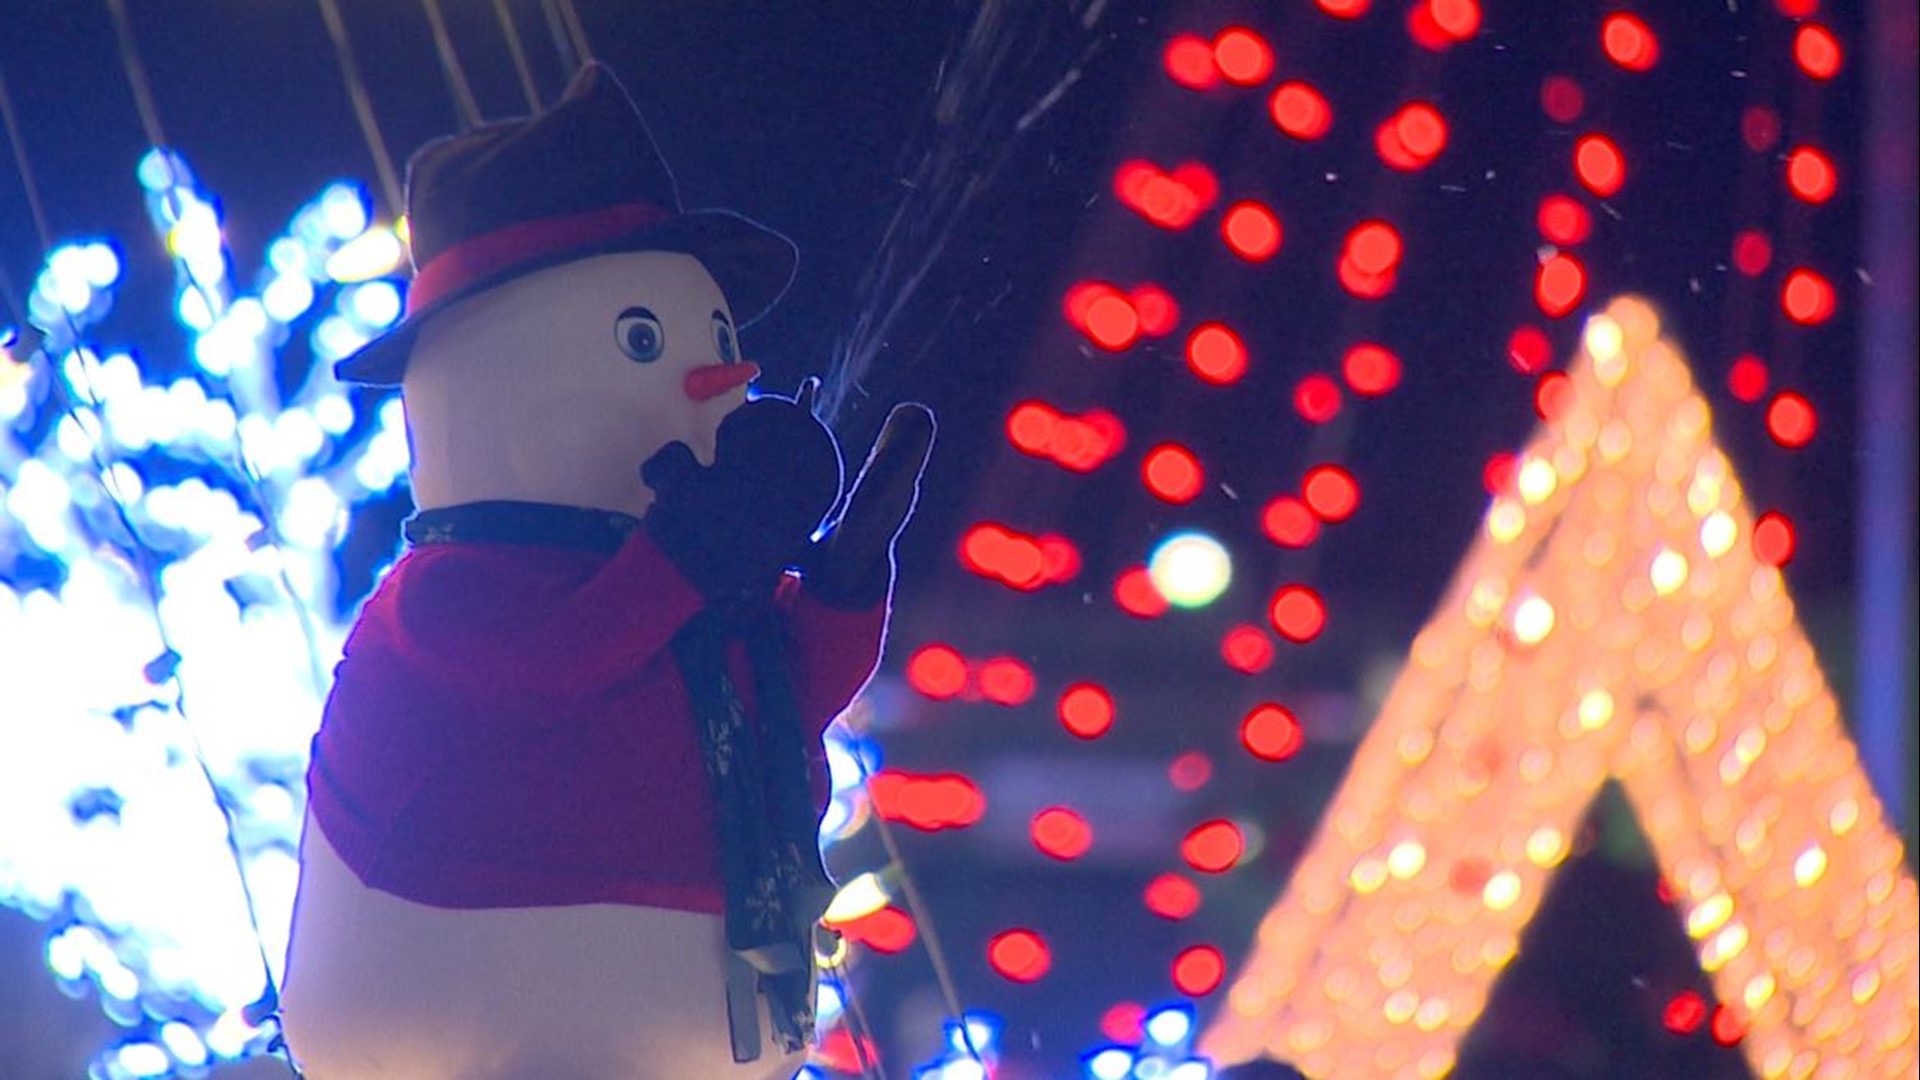 Prices are reduced and the website has changed since customers complained on Friday about false advertisements for the new Winter Wonderland in Frisco.